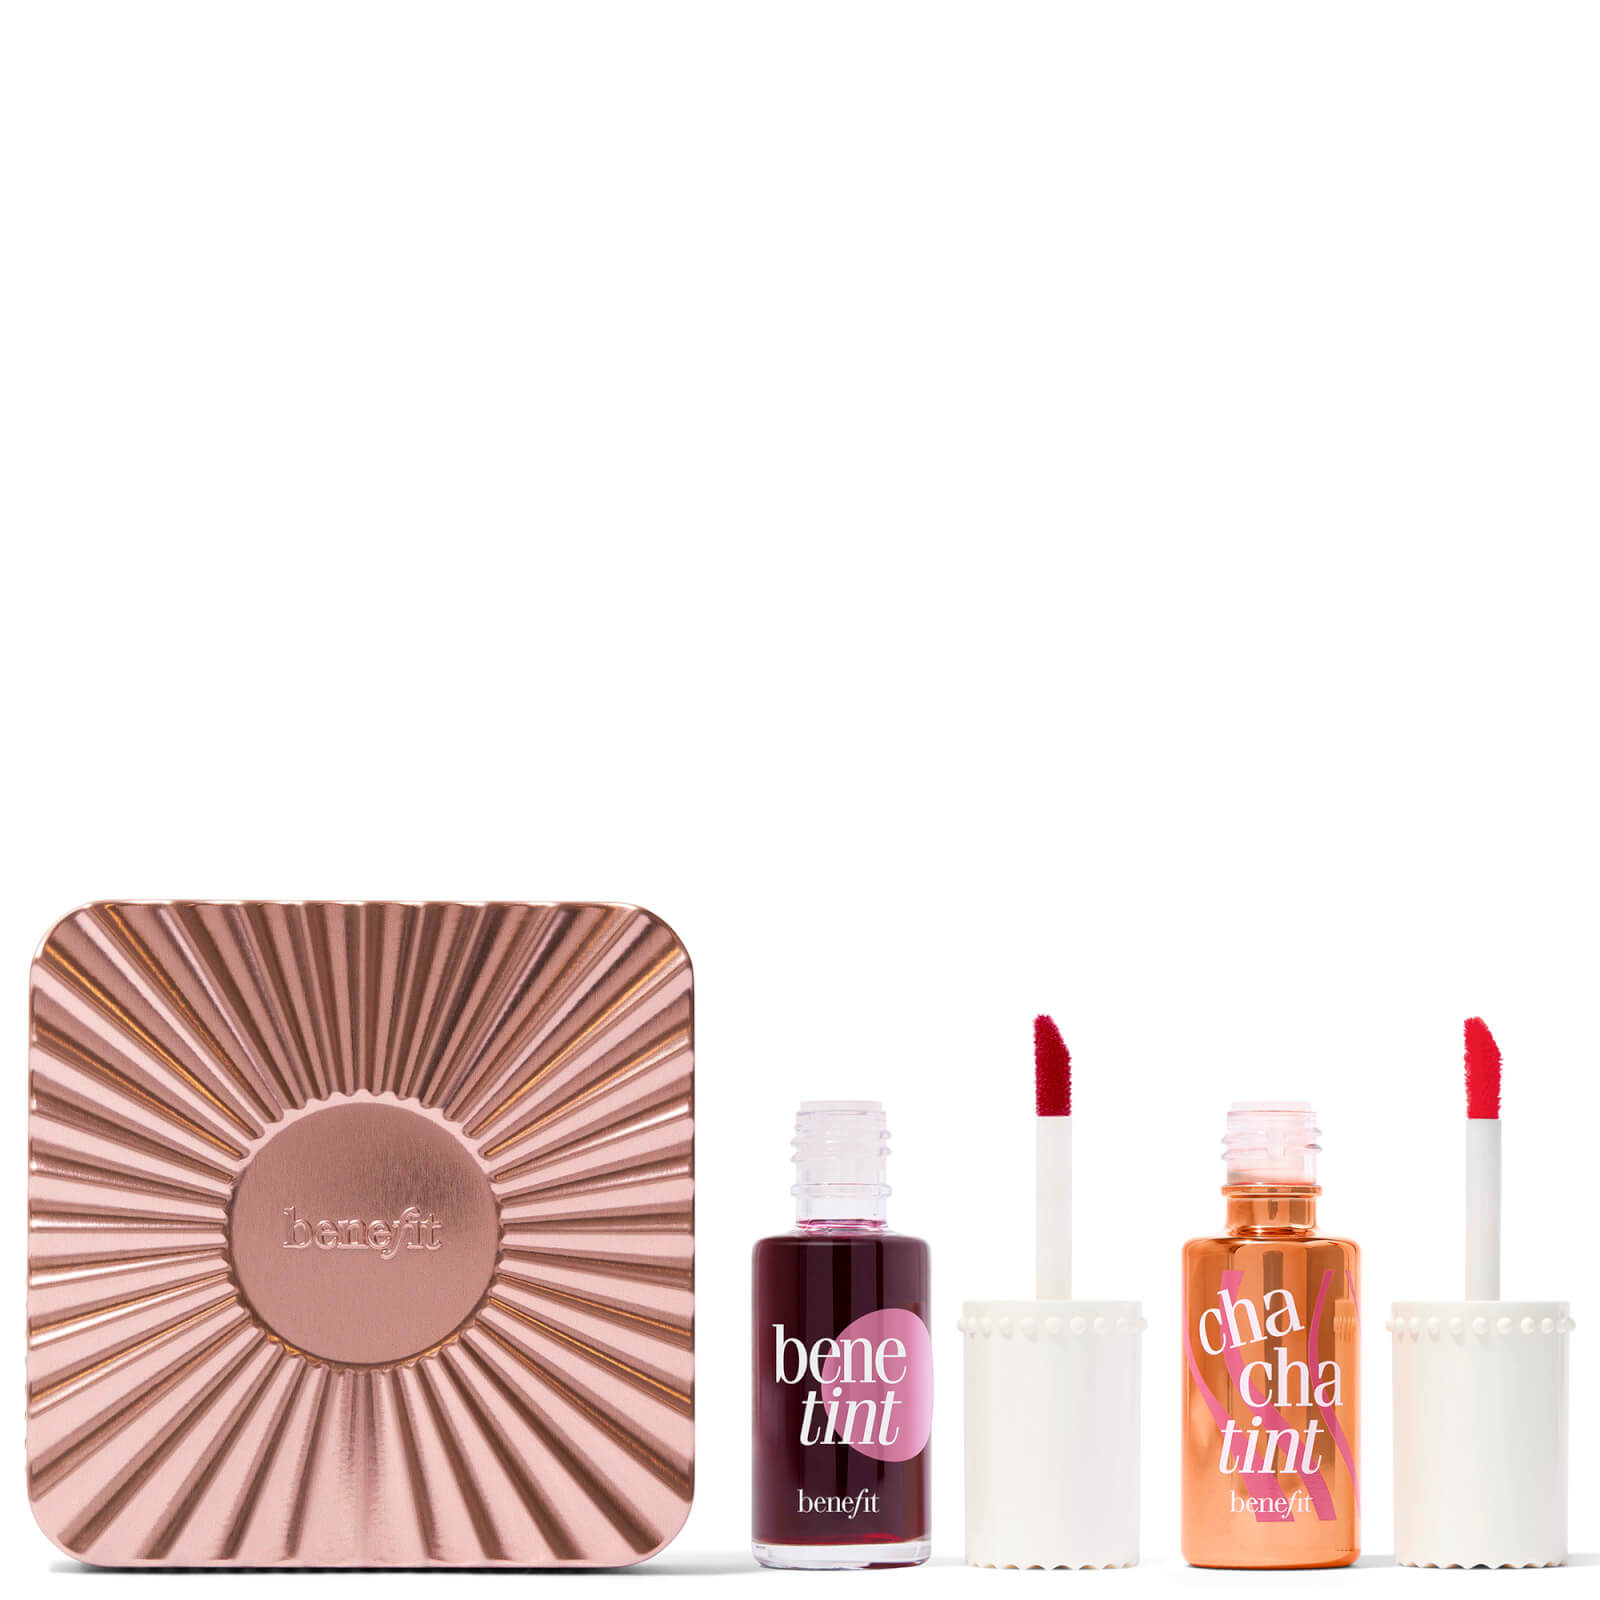 Benefit Tint Talk Benetint And Chacha Tint Lip And Cheek Stain Duo Set In White